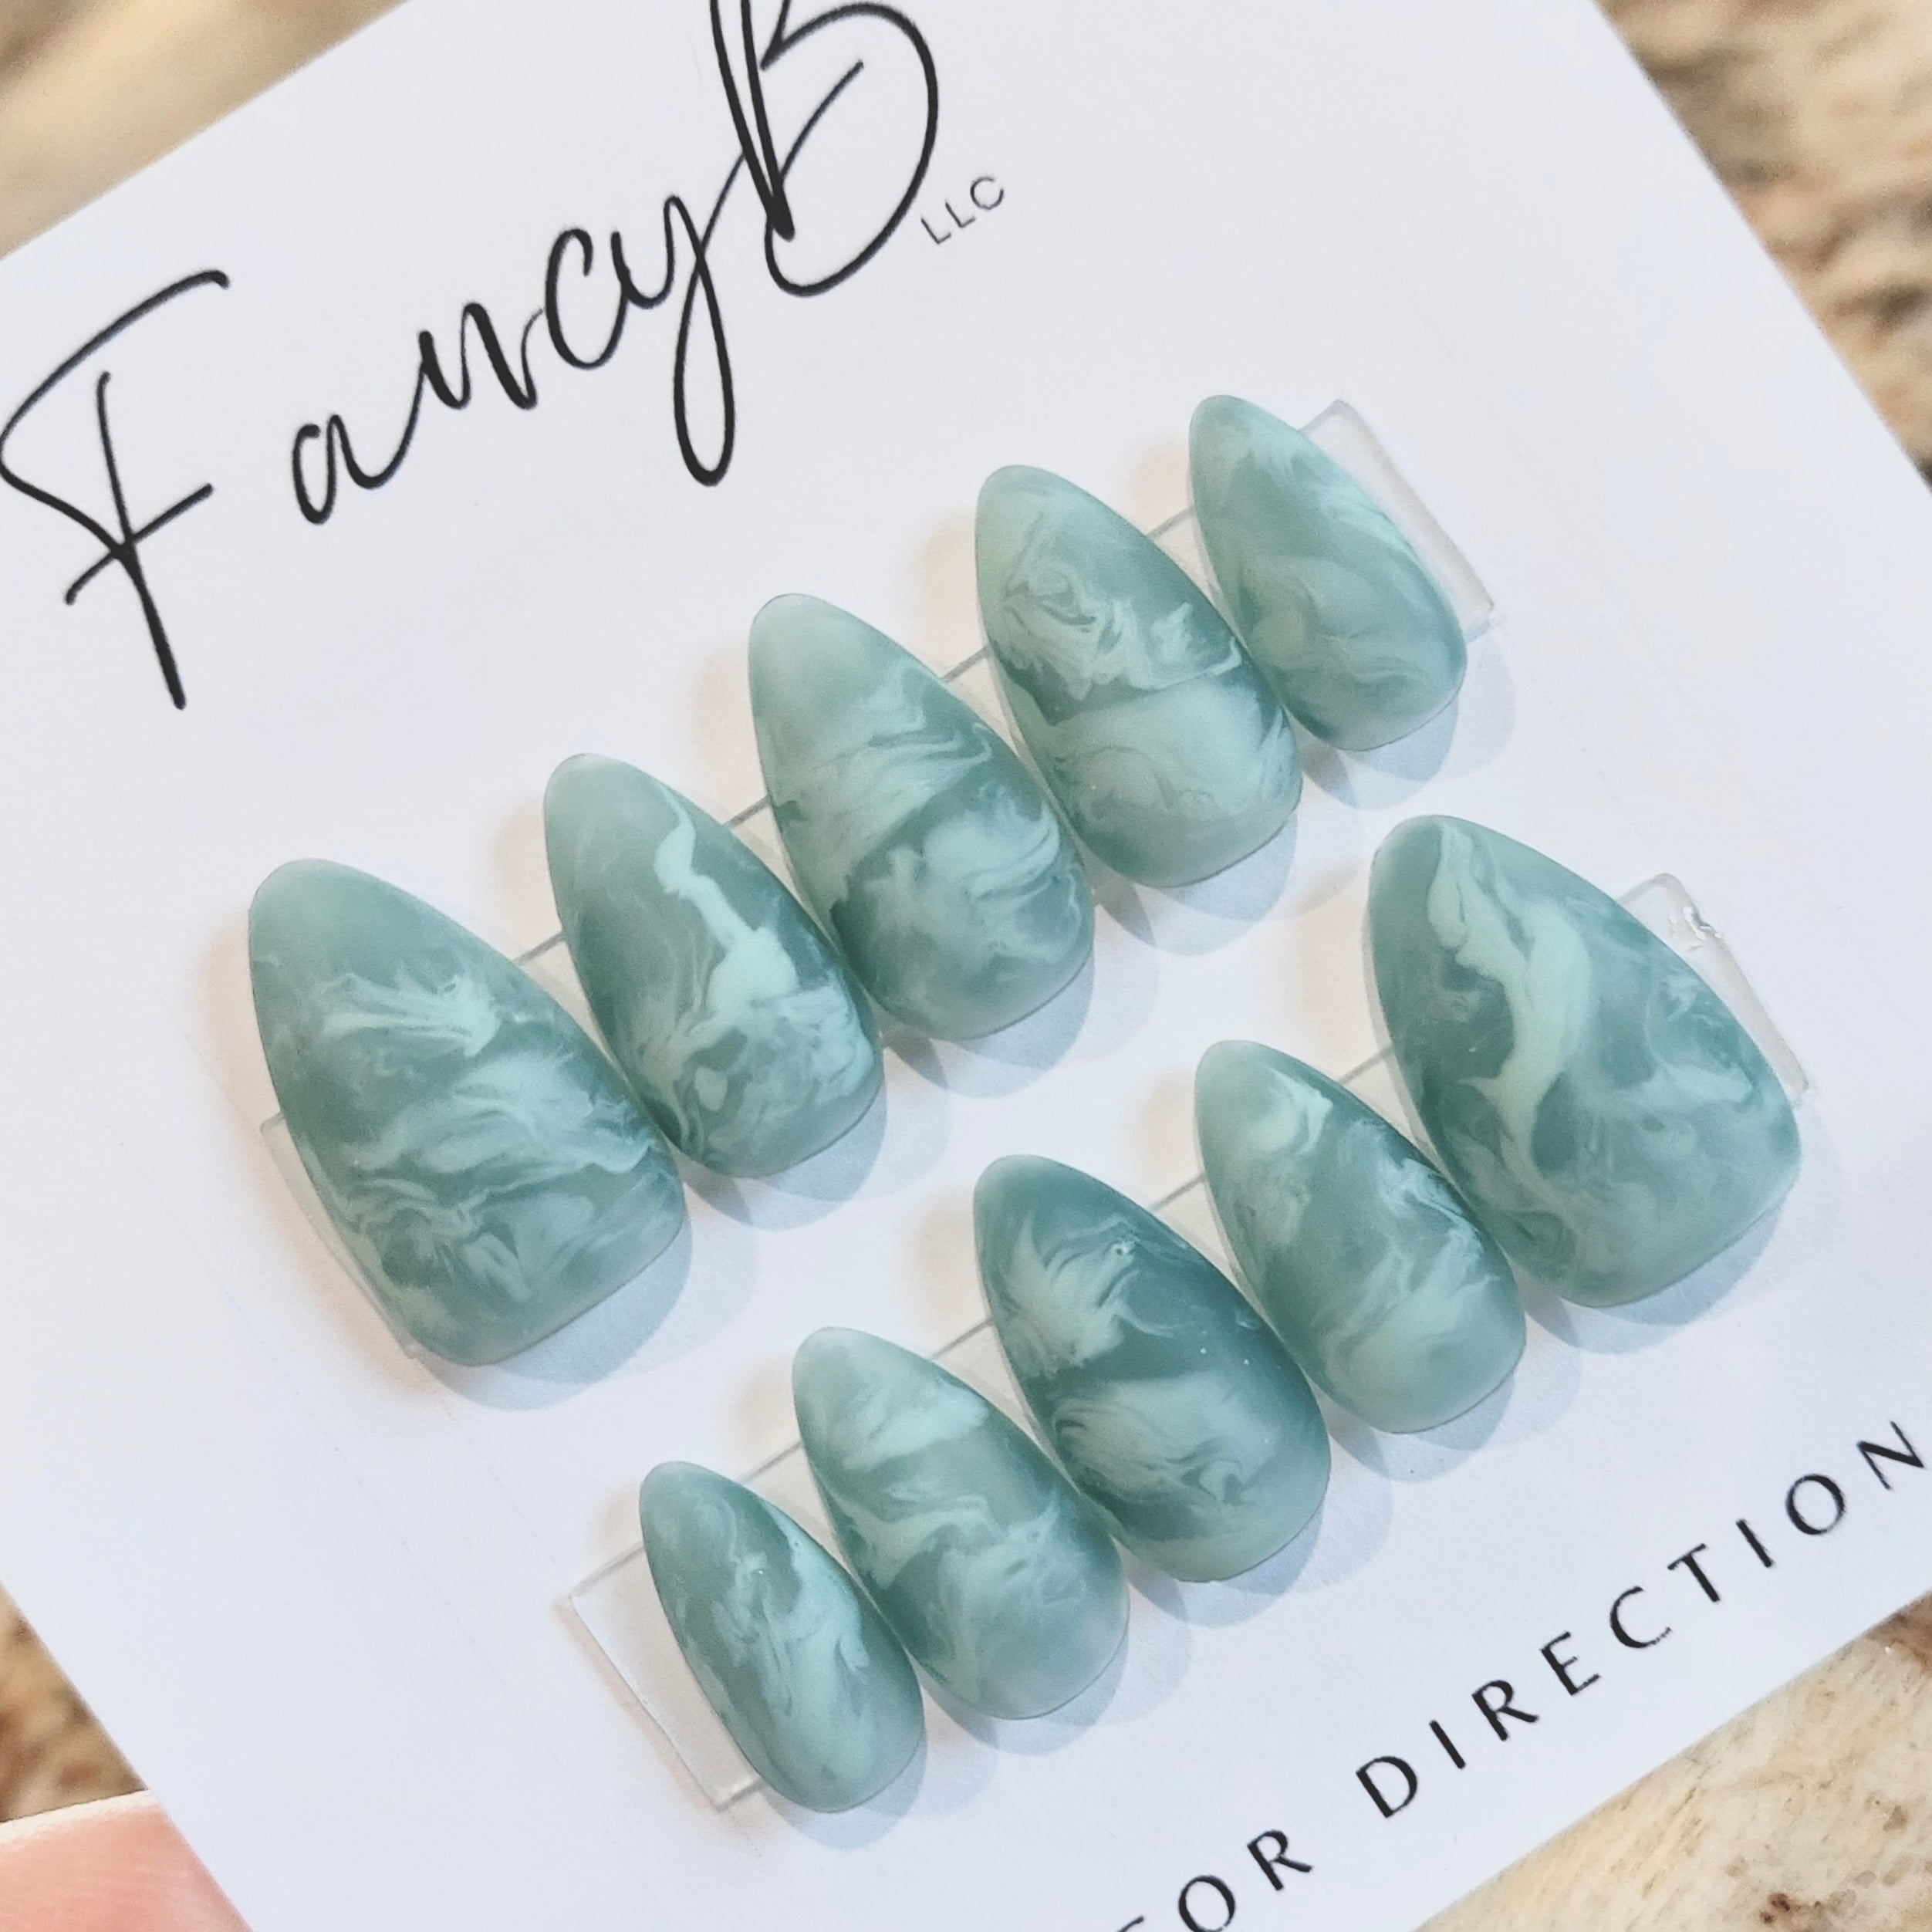 Custom press on nails with seafoam green smoky swirls and marble design, sea glass nail design, ocean waves all on a short almond shape. Fancyb Nails.